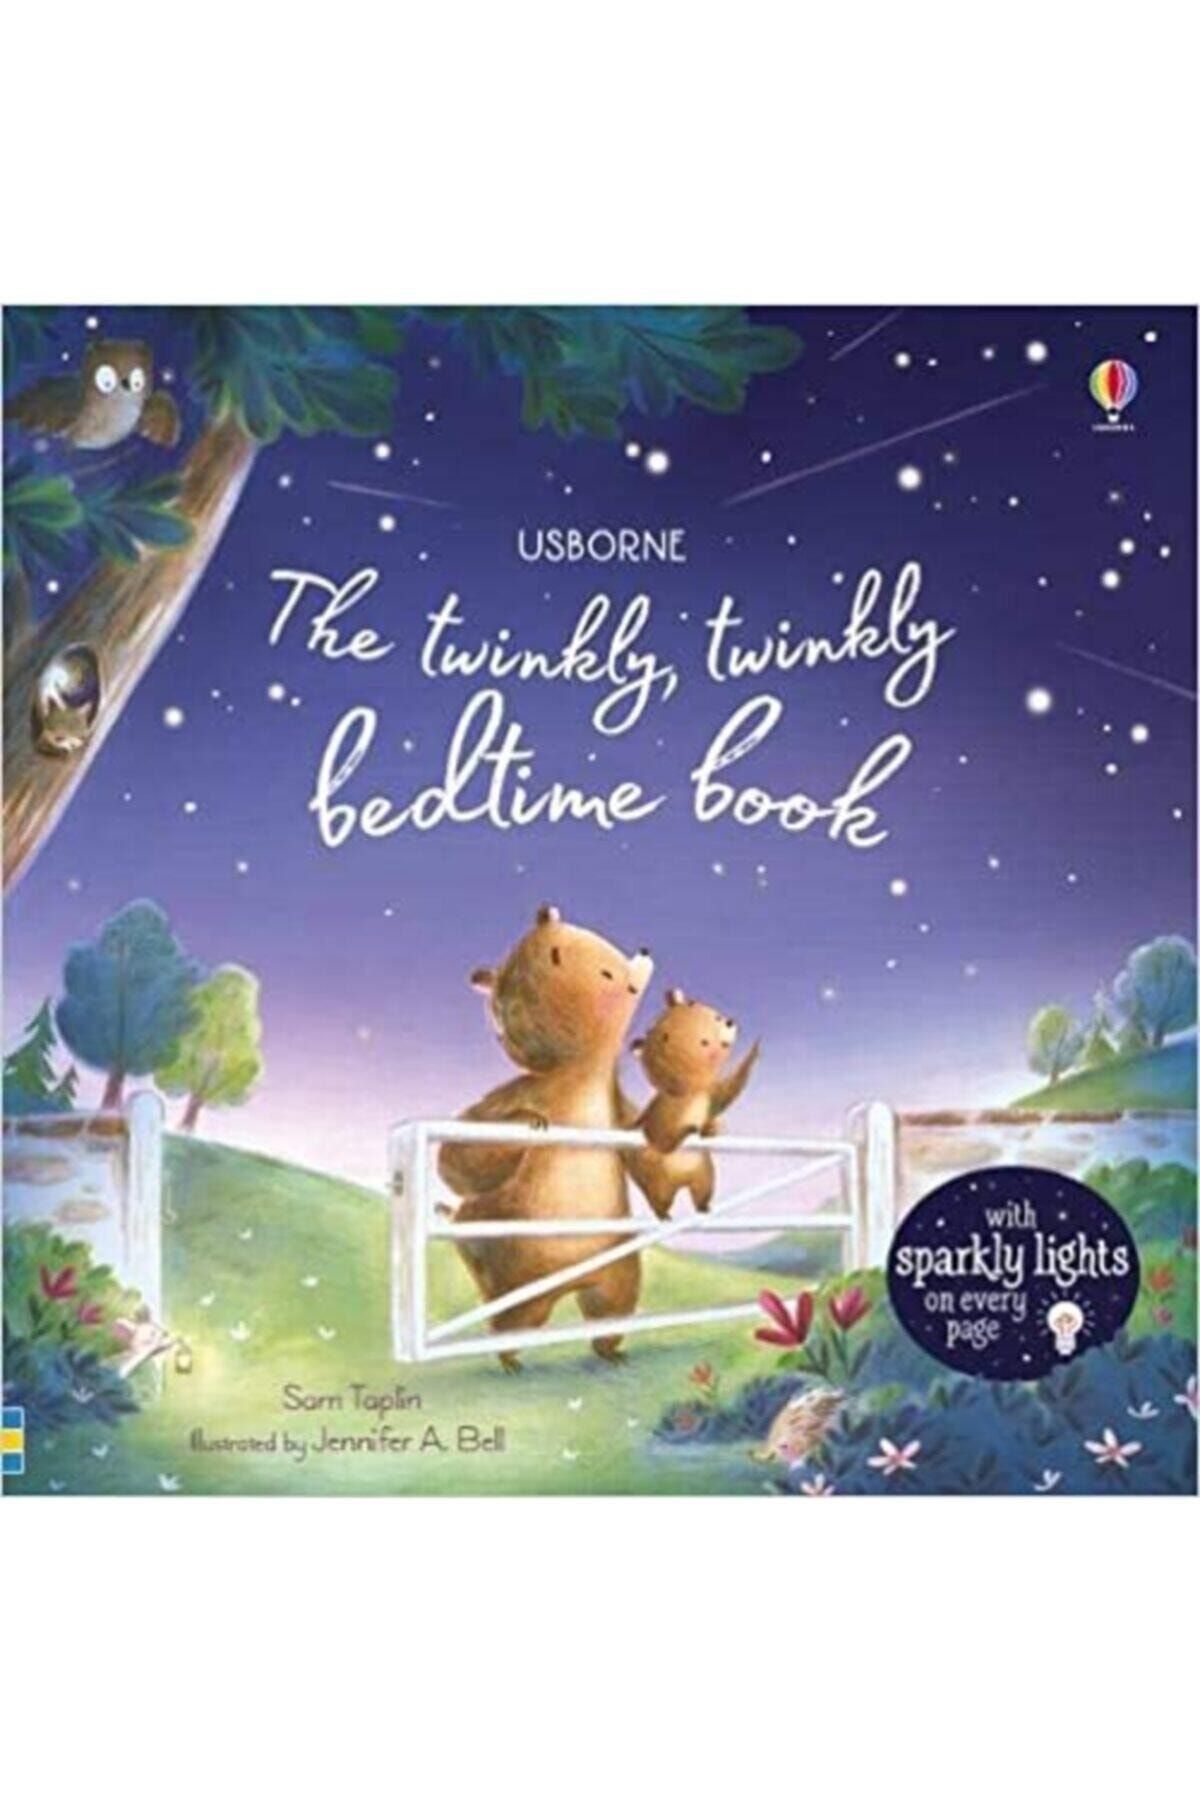 Usborne The Twinkly, Twinkly Bedtime Book